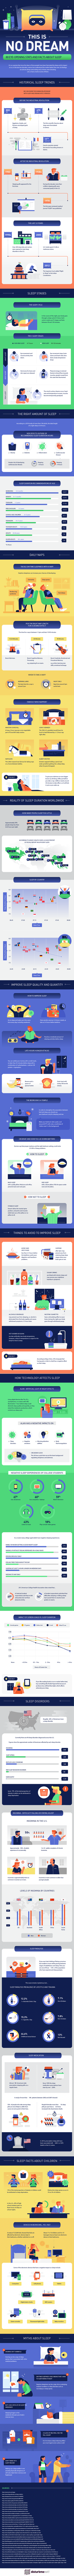 Eye-Opening-Stats-Facts-About-Sleep-Infographic